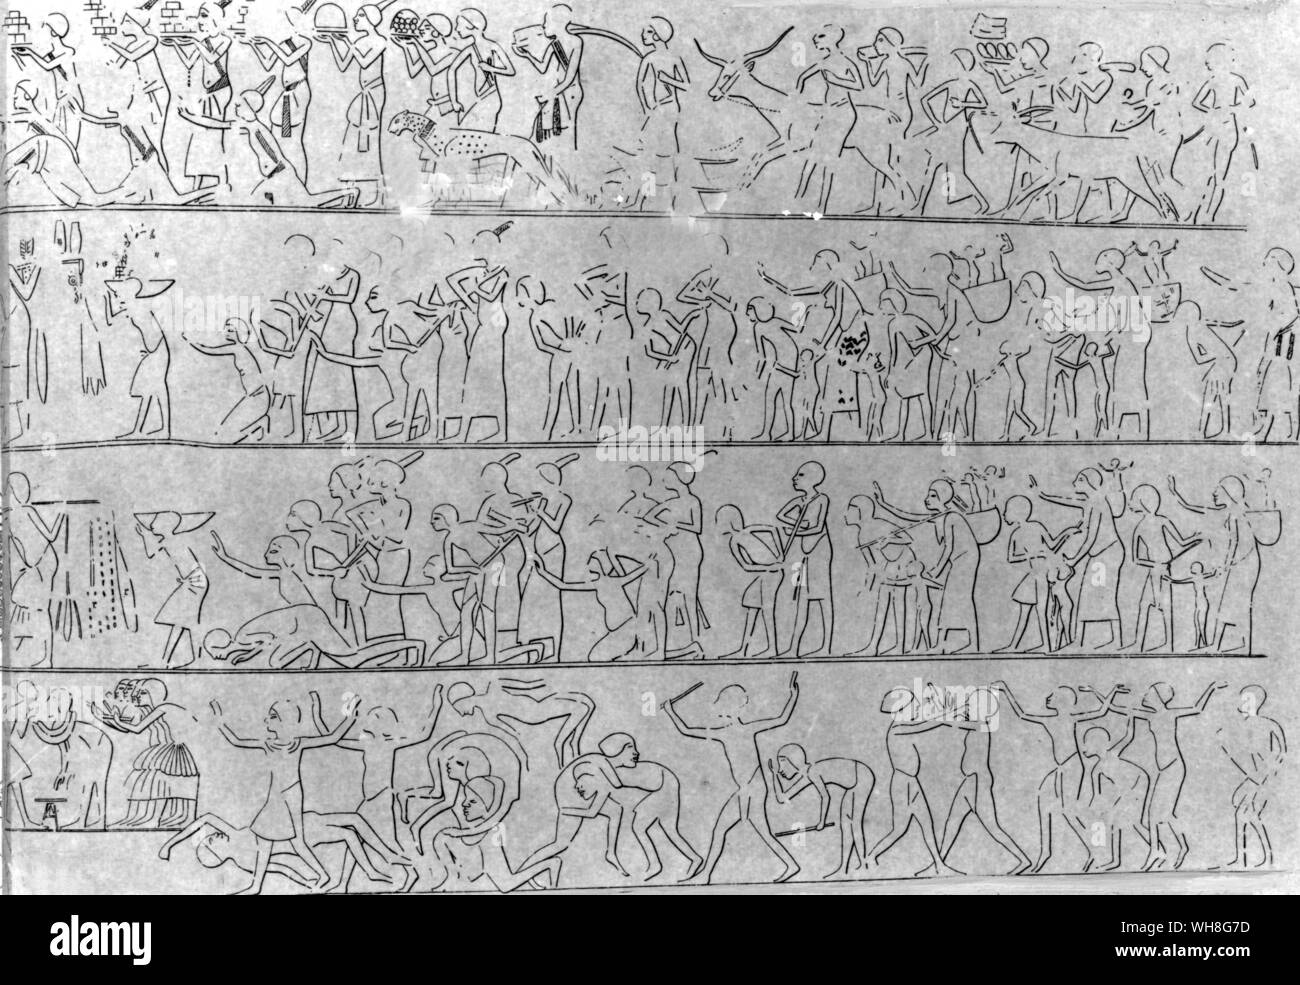 A detail from the processions and celebrations of the Nubians during the Parade of foreign tribute in the year 12. Tutankhamen by Christiane Desroches Noblecourt, page 152.. Stock Photo